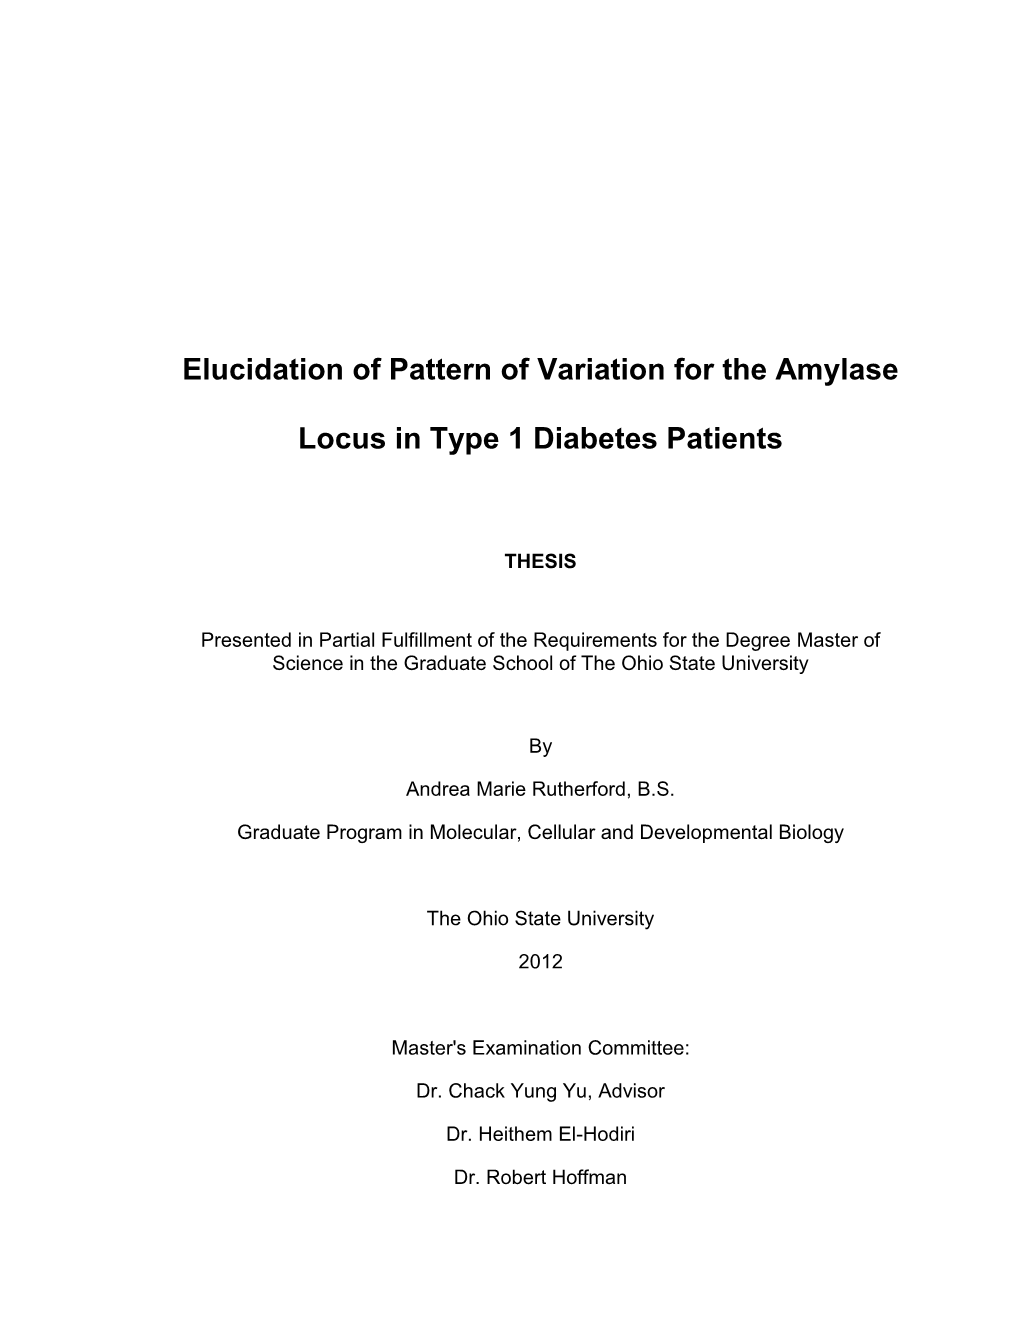 Elucidation of Pattern of Variation for the Amylase Locus in Type 1 Diabetes Patients…………………………………………